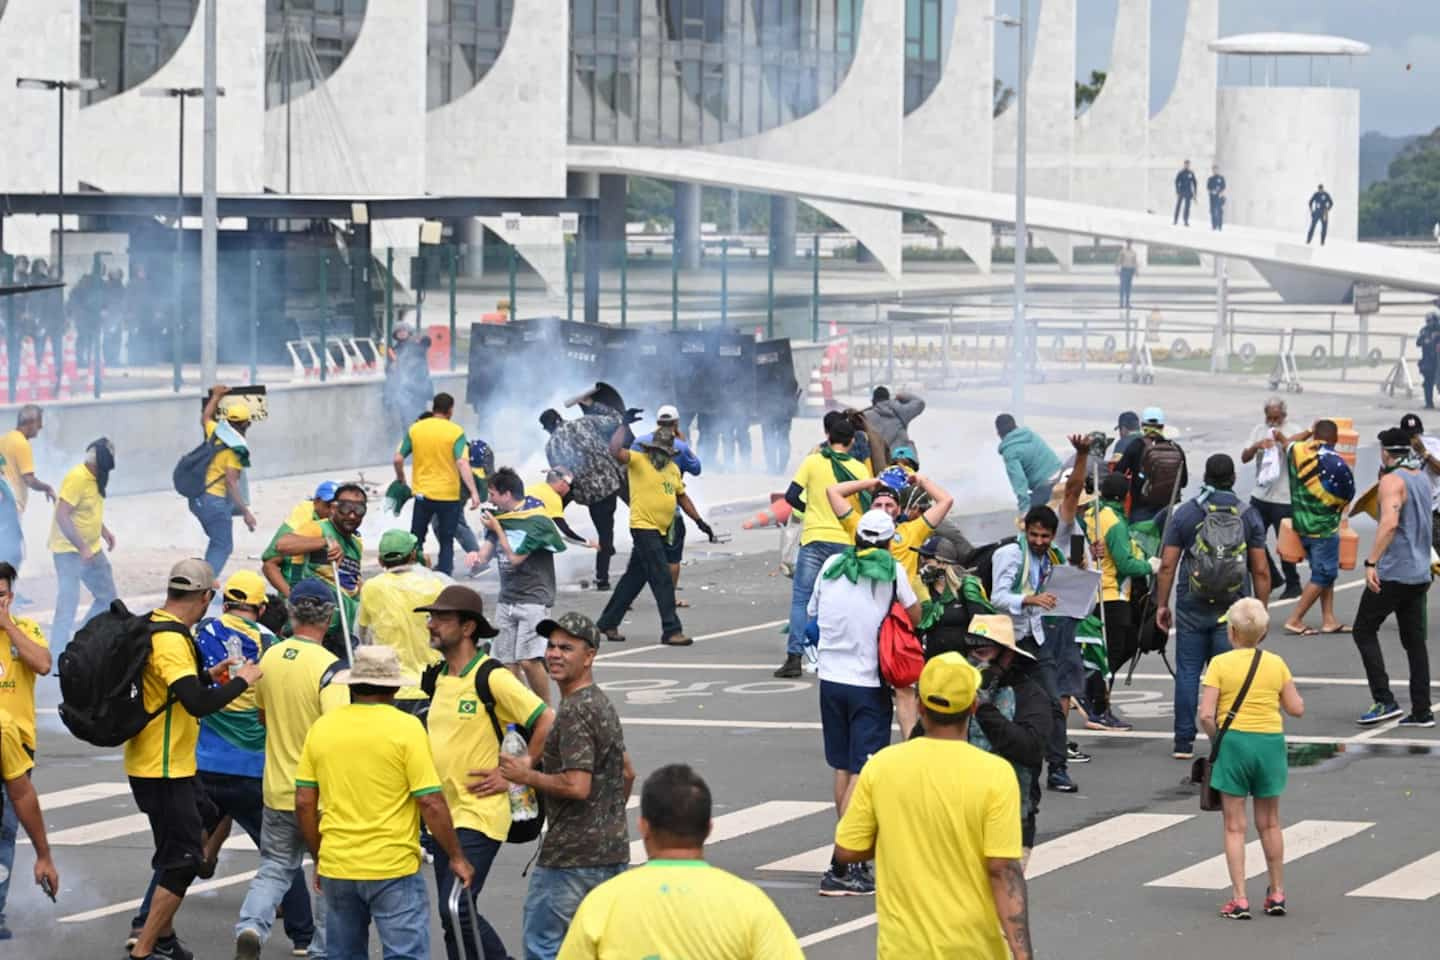 [IN IMAGES] Brazil: clashes between police and bolsonarists massed in front of Congress